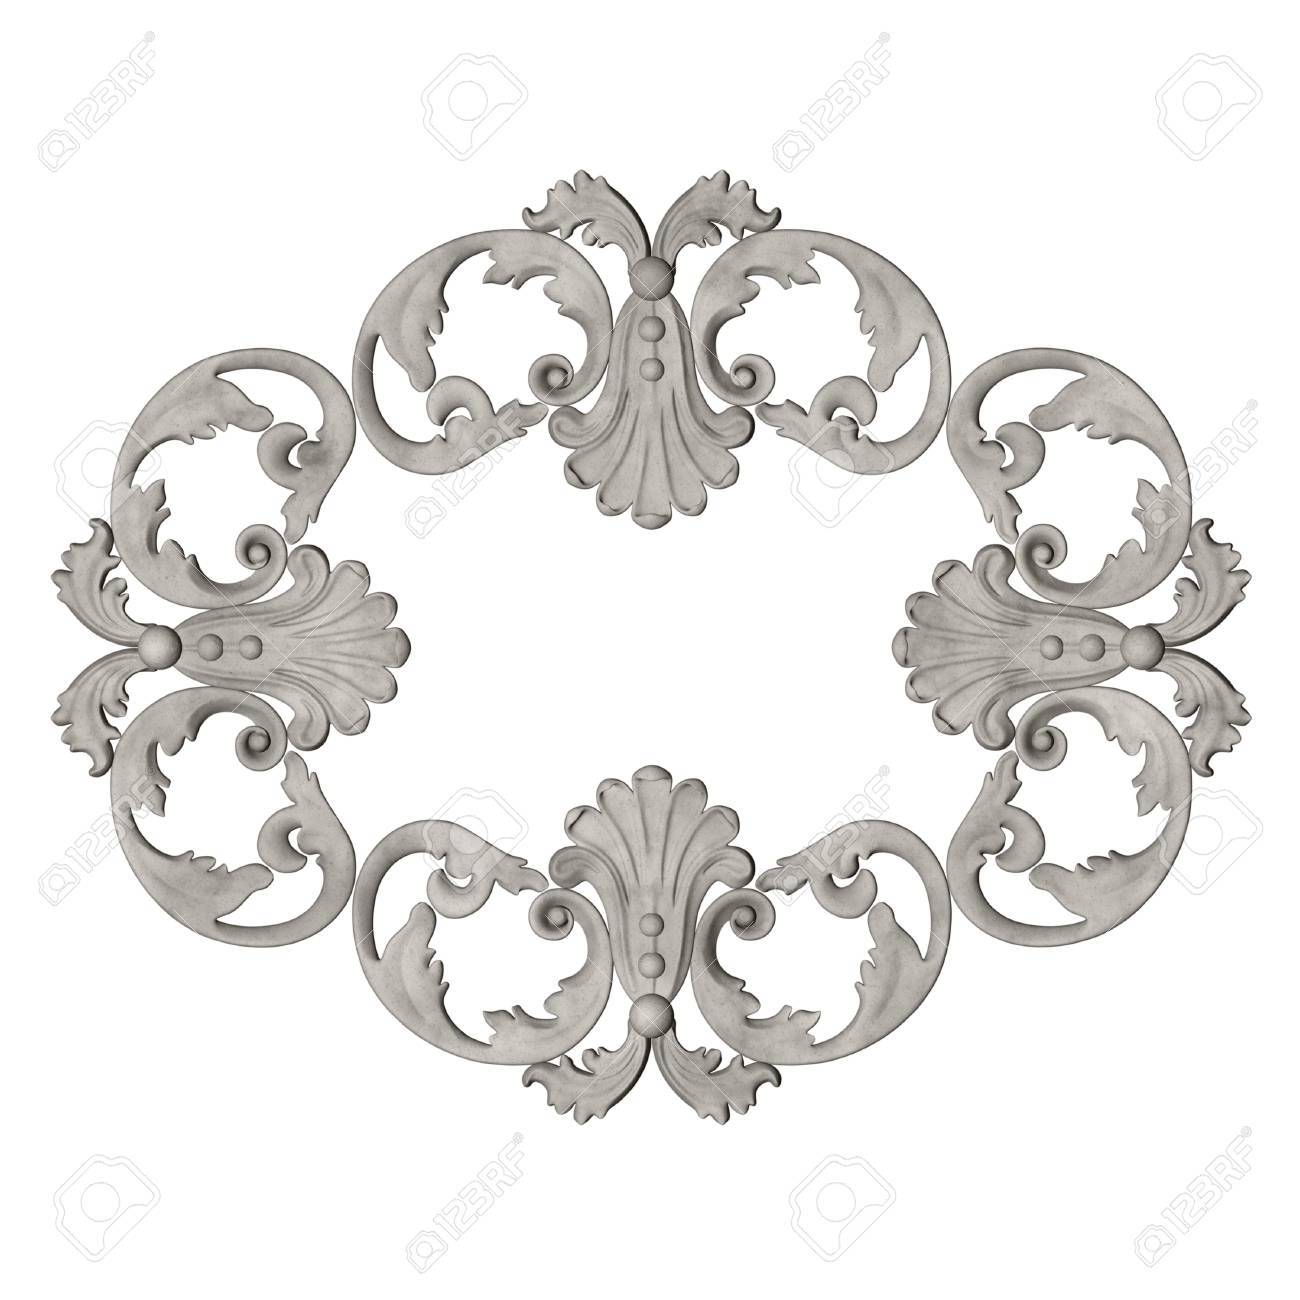 3d Frame The Sculptural Form On A White Background Stock Photo